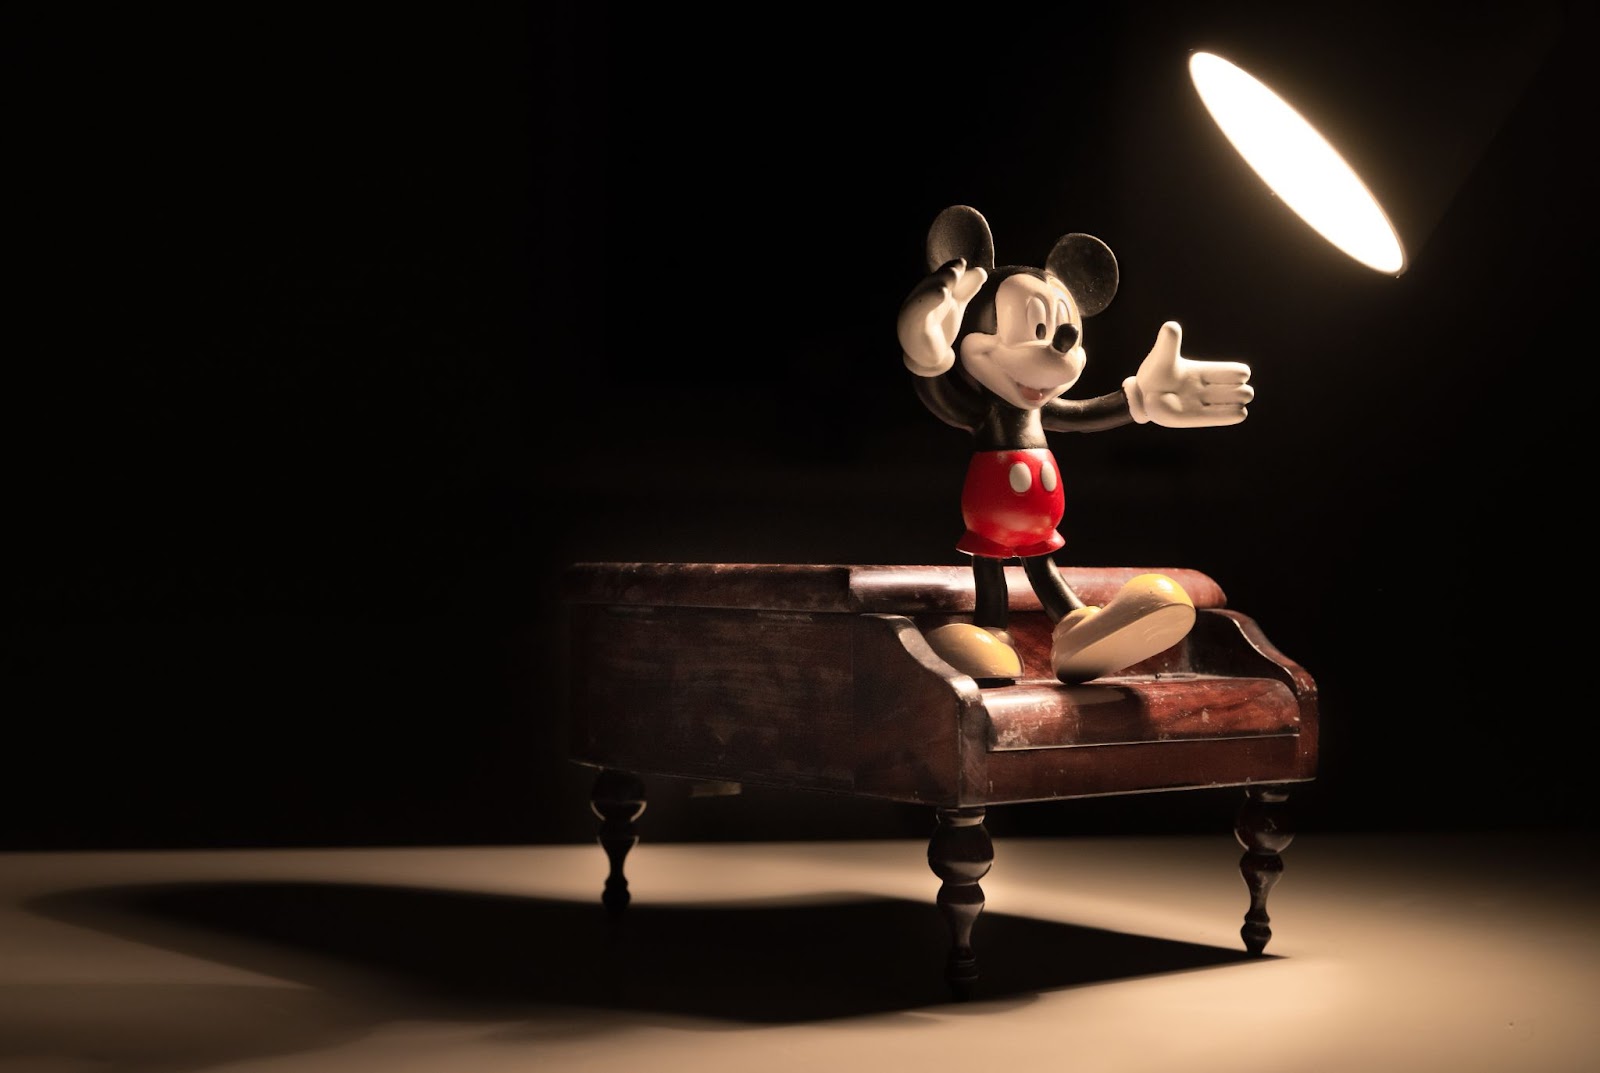 mickey mouse seen as an iconic character for those in the career of animation